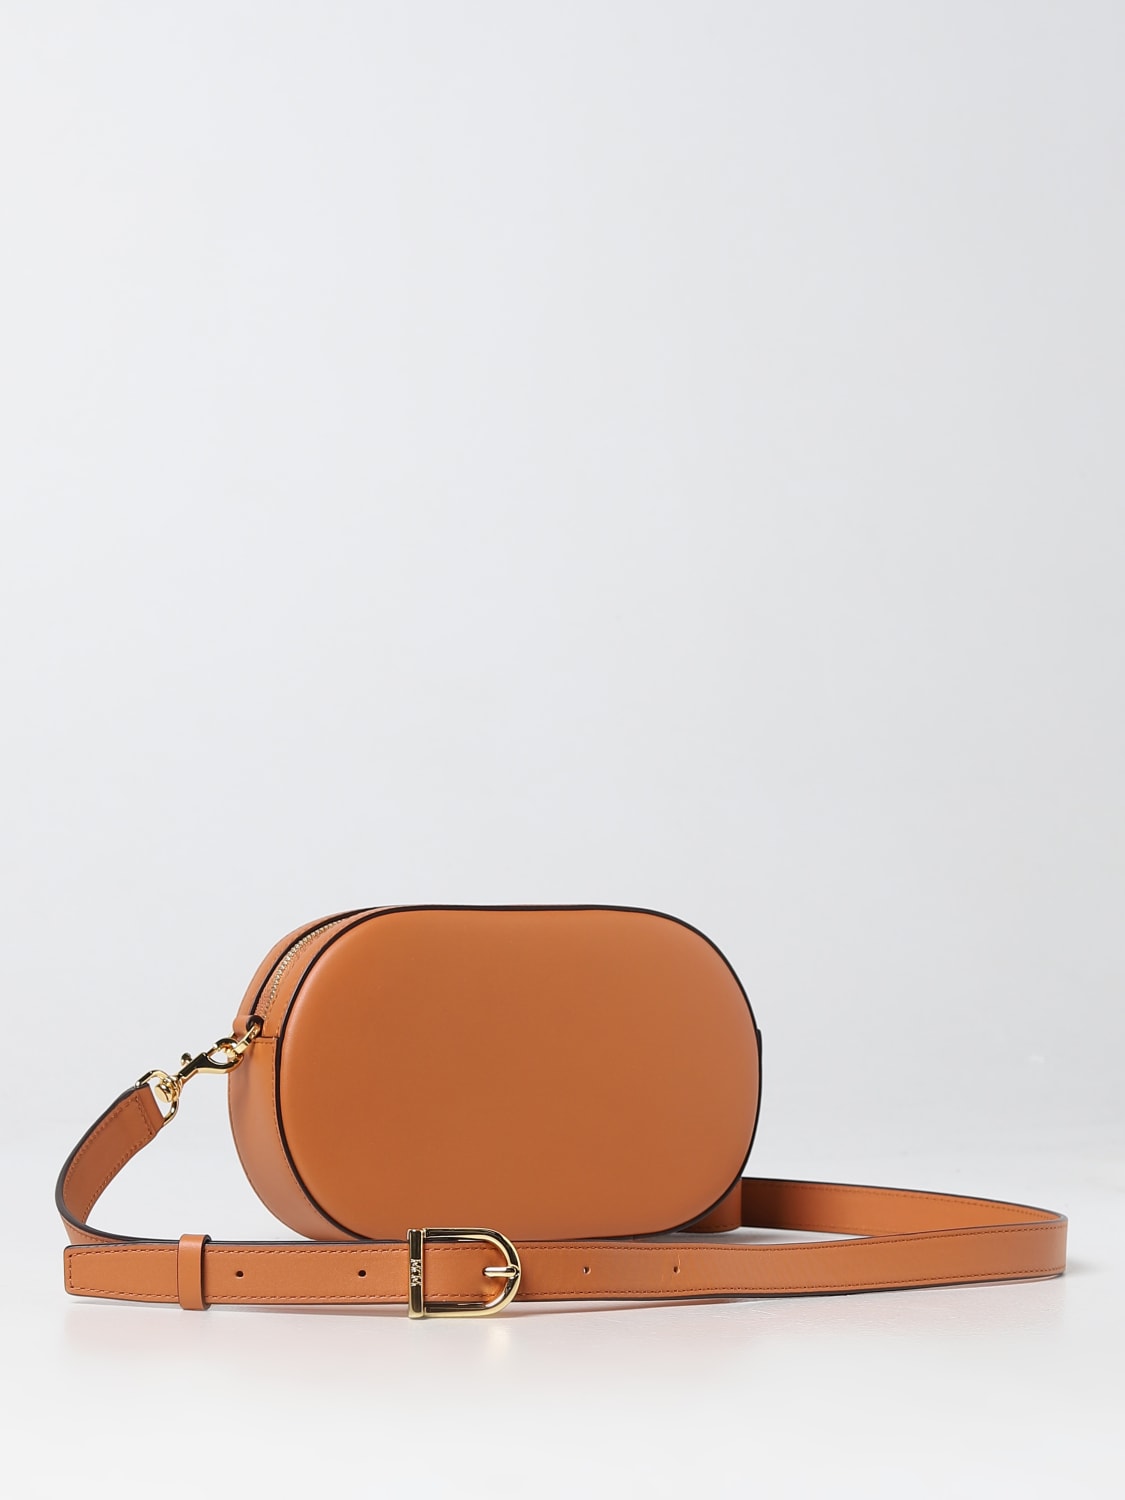 Mcm Outlet: mini bag for woman - Brown  Mcm mini bag MMTCSKC02 online at